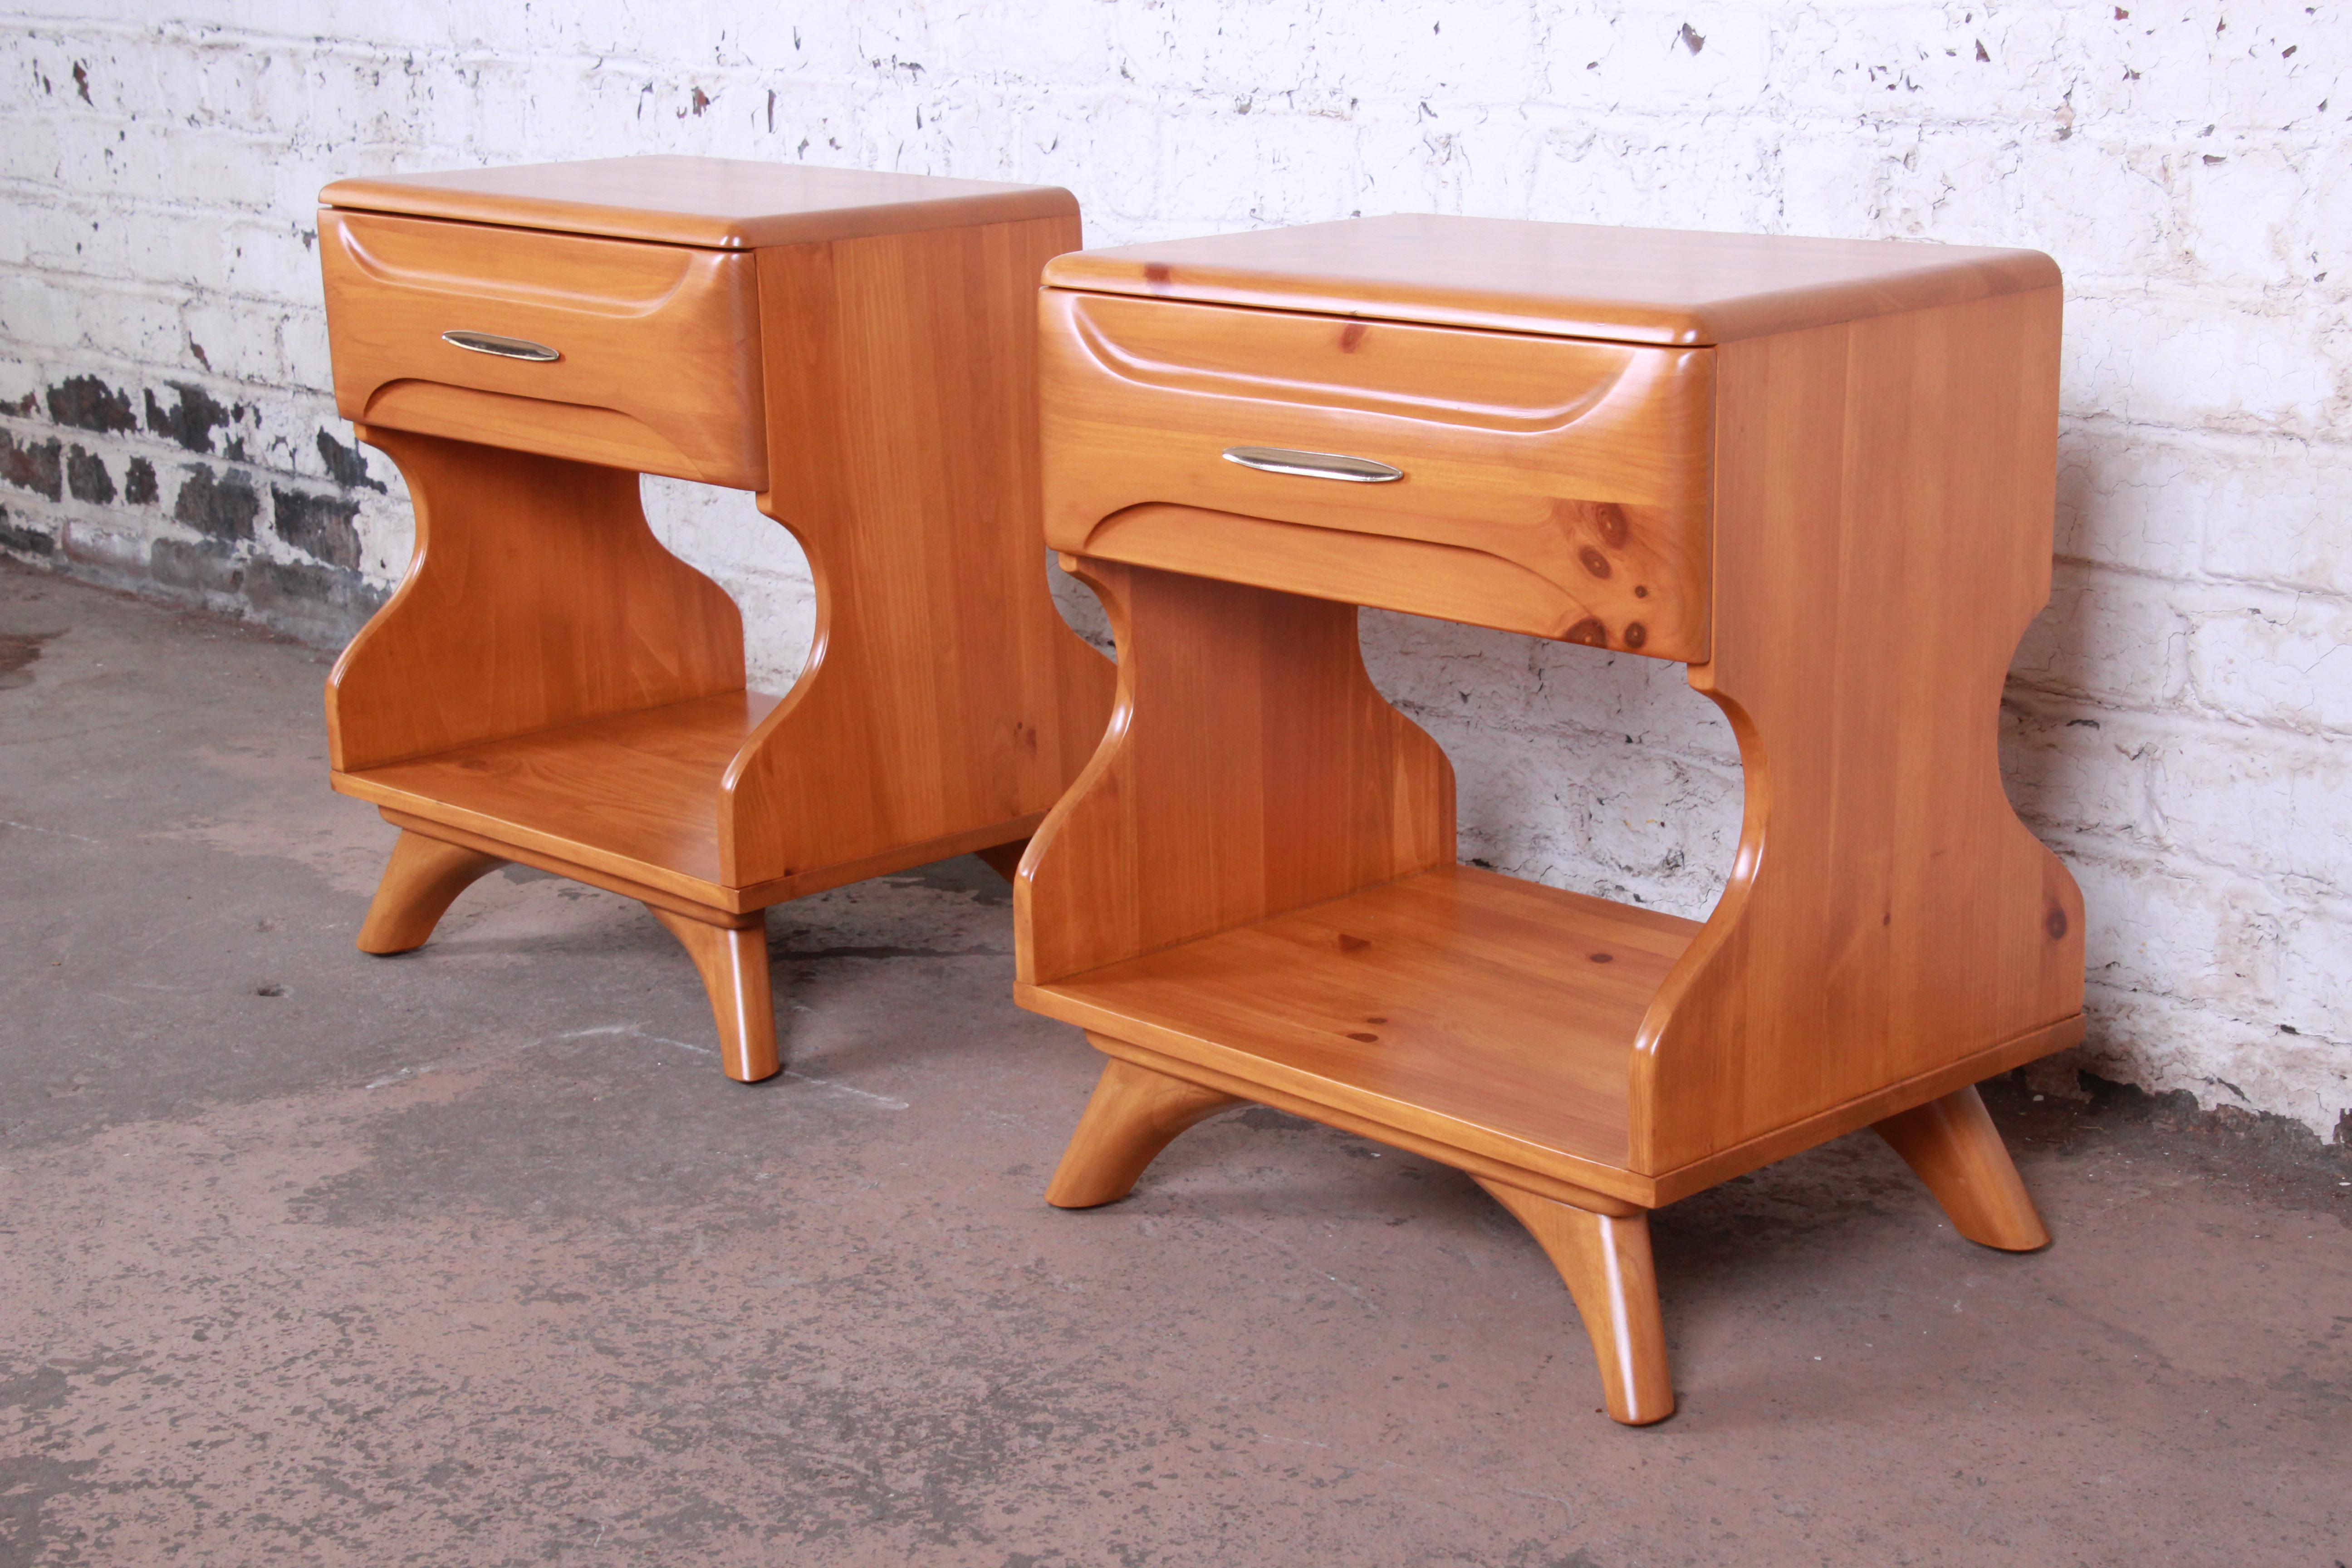 An exceptional pair of Mid-Century Modern sculptured pine nightstands or end tables by Franklin Shockey Co. The nightstands feature gorgeous knotty pine wood grain and a unique hourglass profile. They are extremely well made from solid pine. The